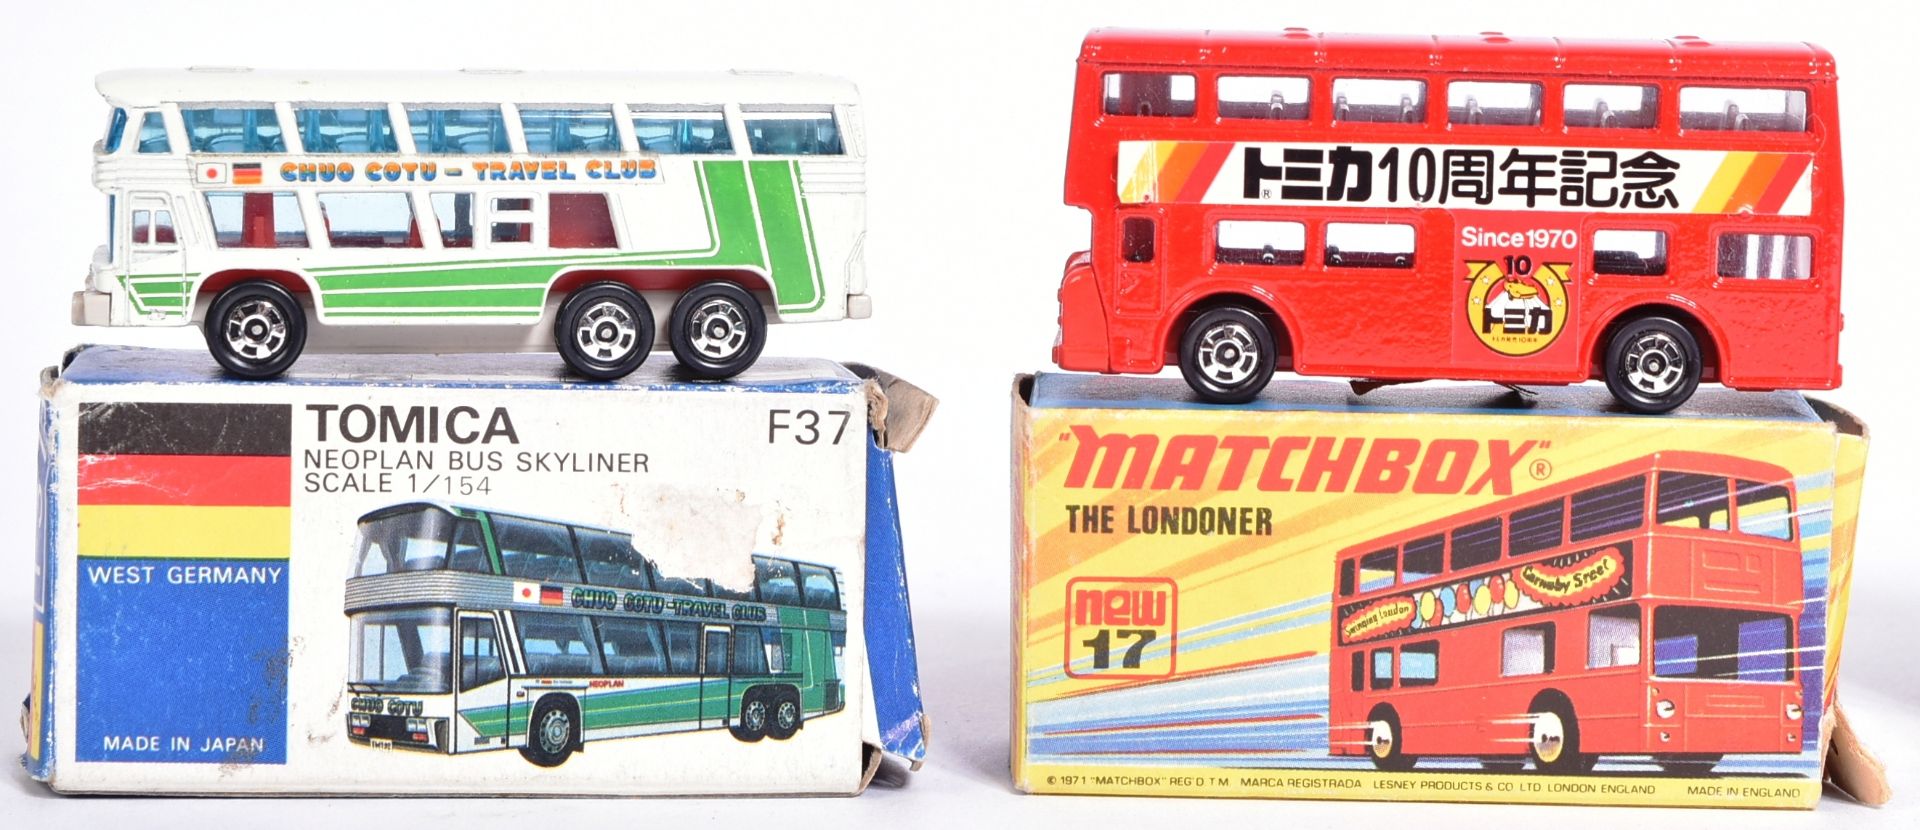 DIECAST - COLLECTION OF VINTAGE DIECAST MODELS - Image 2 of 5